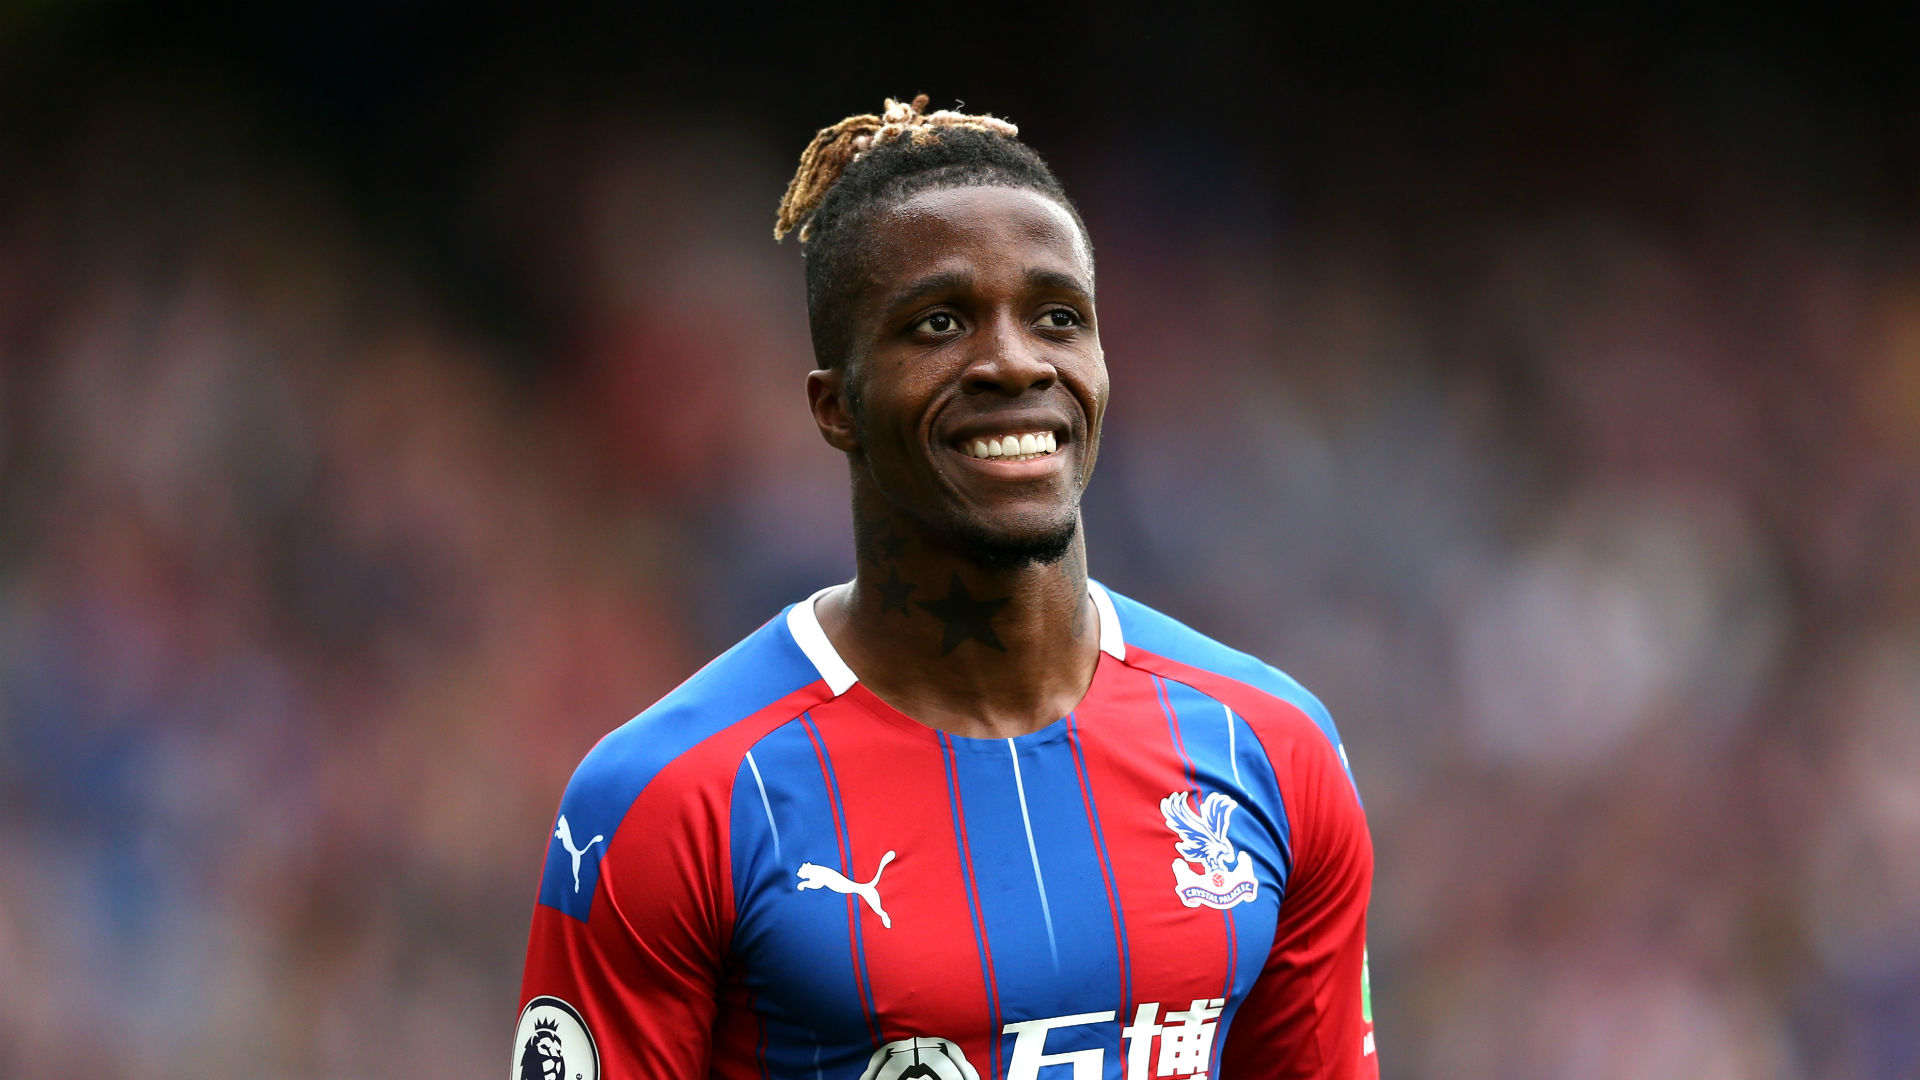 Zaha's agent hints at January move as he declares Crystal Palace star deserves new challenge